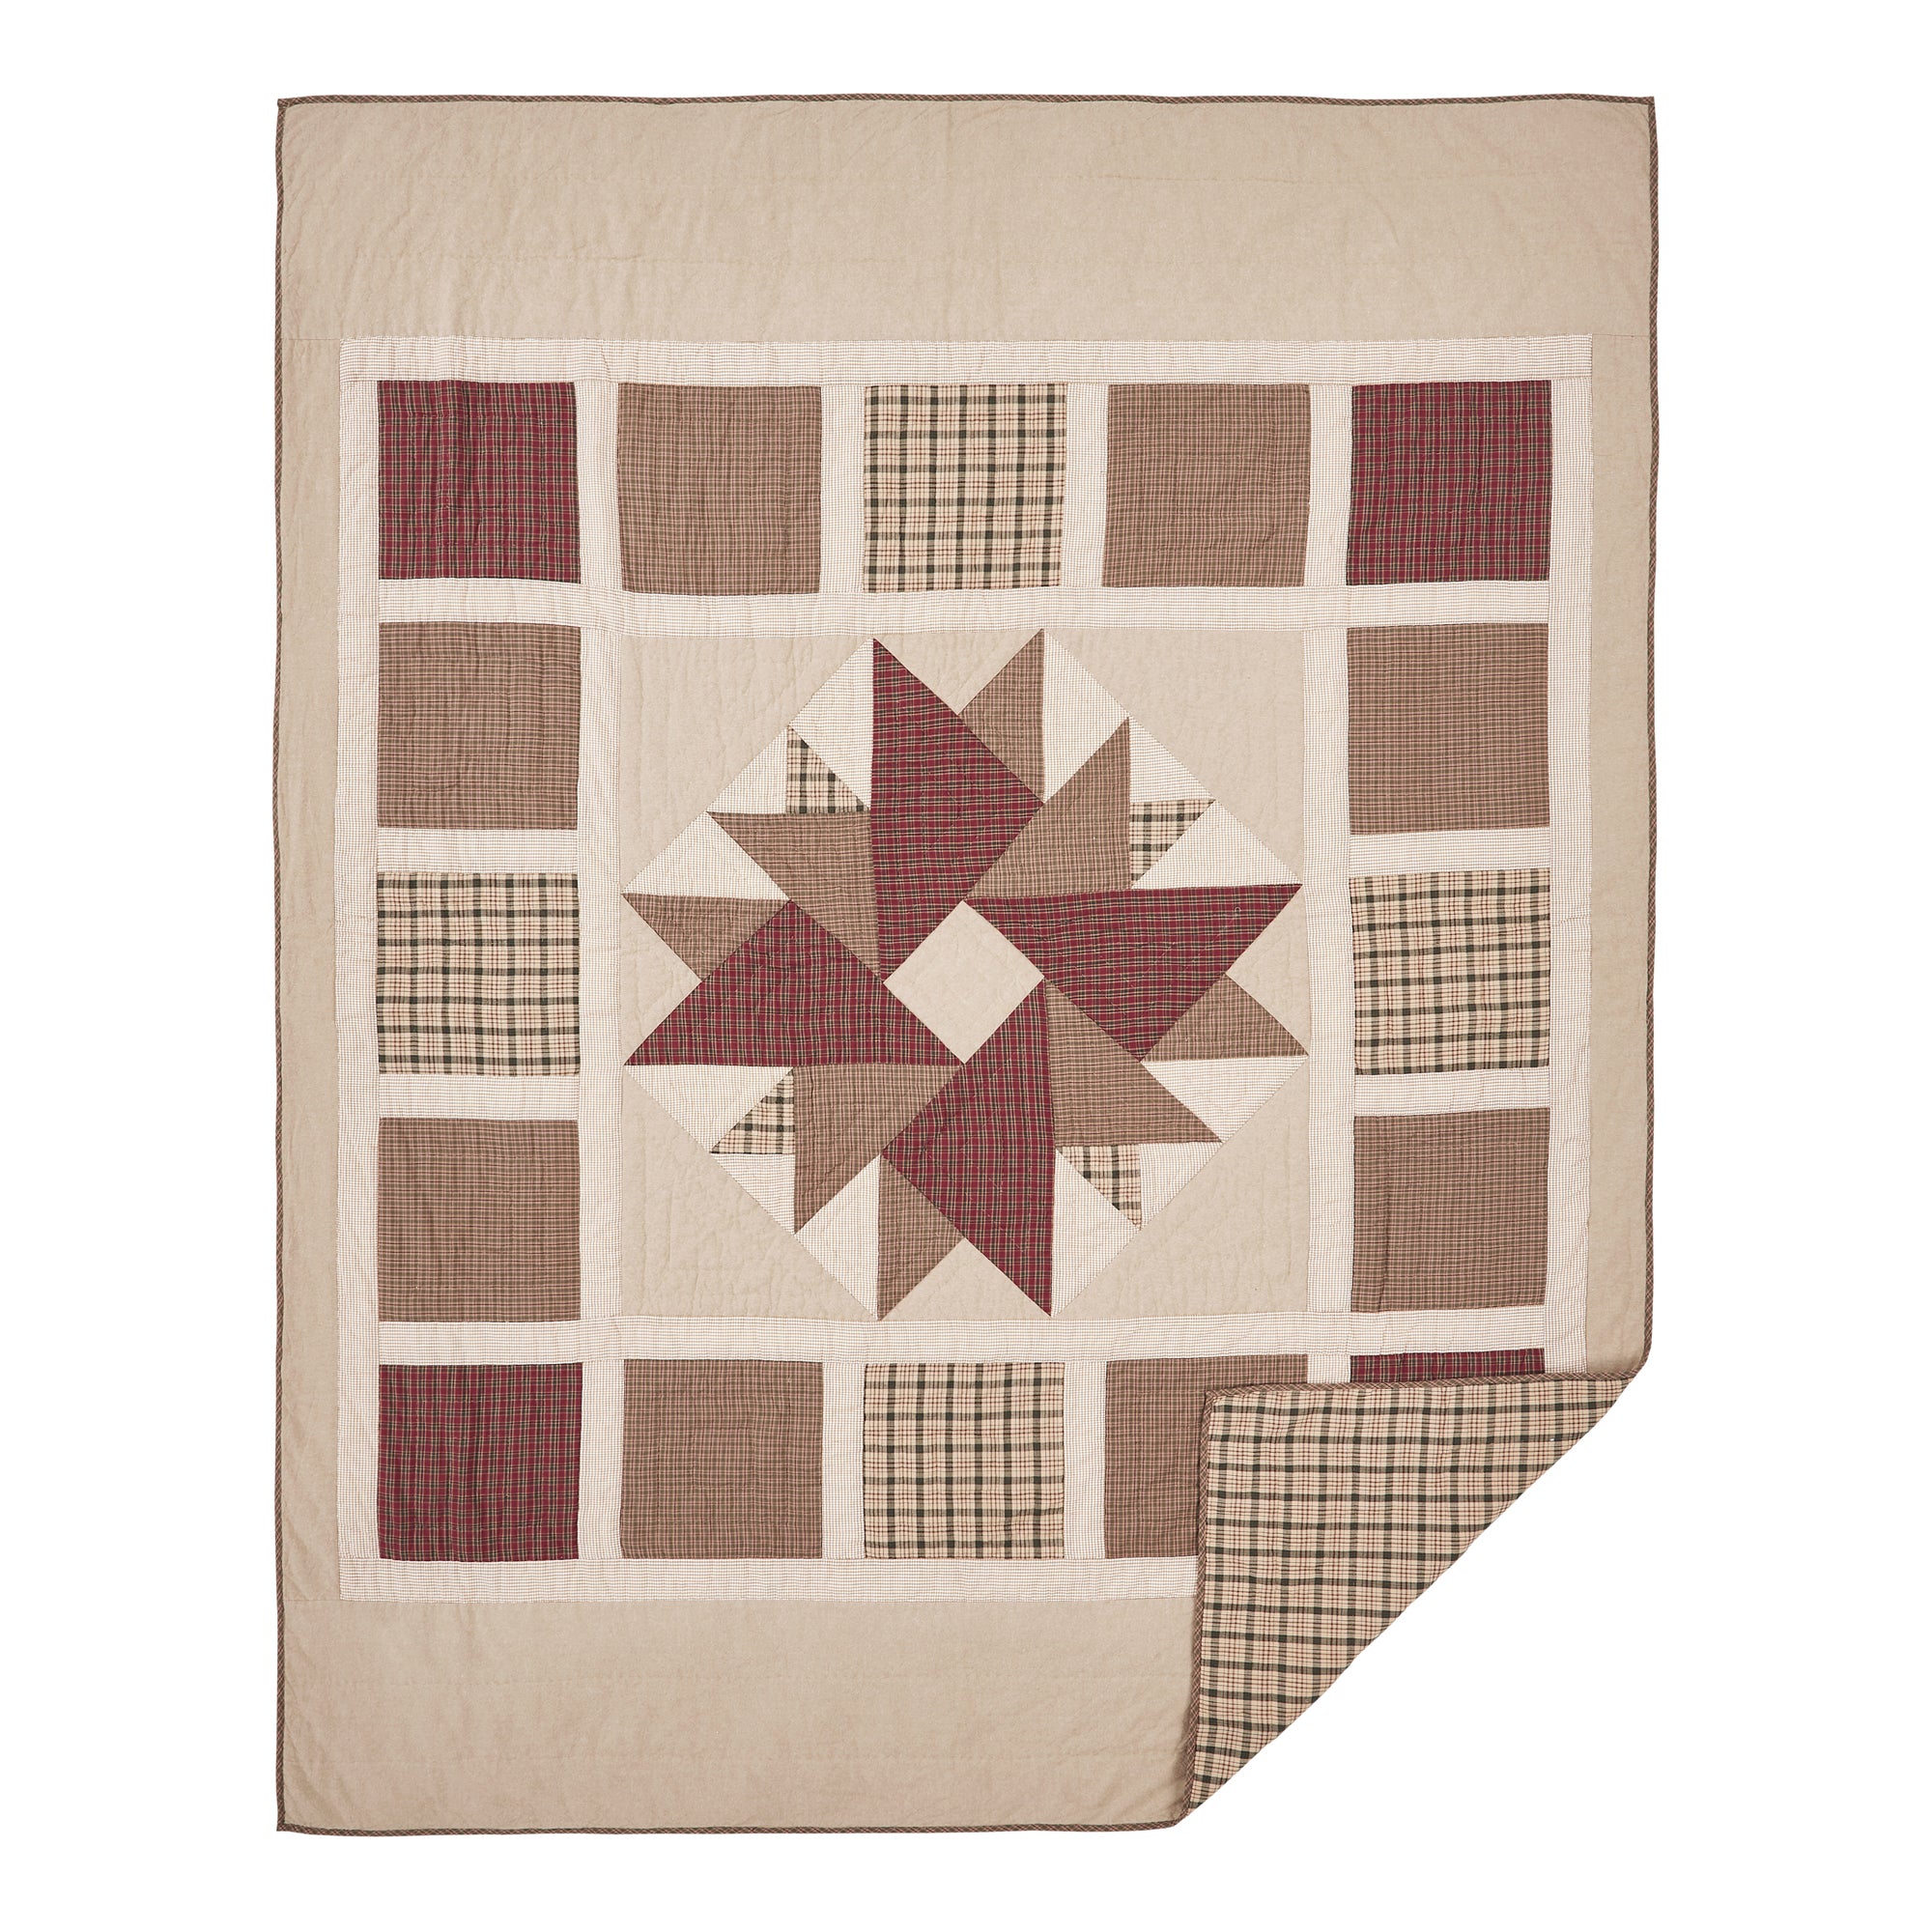 Cider Mill Twin Quilt 68Wx86L